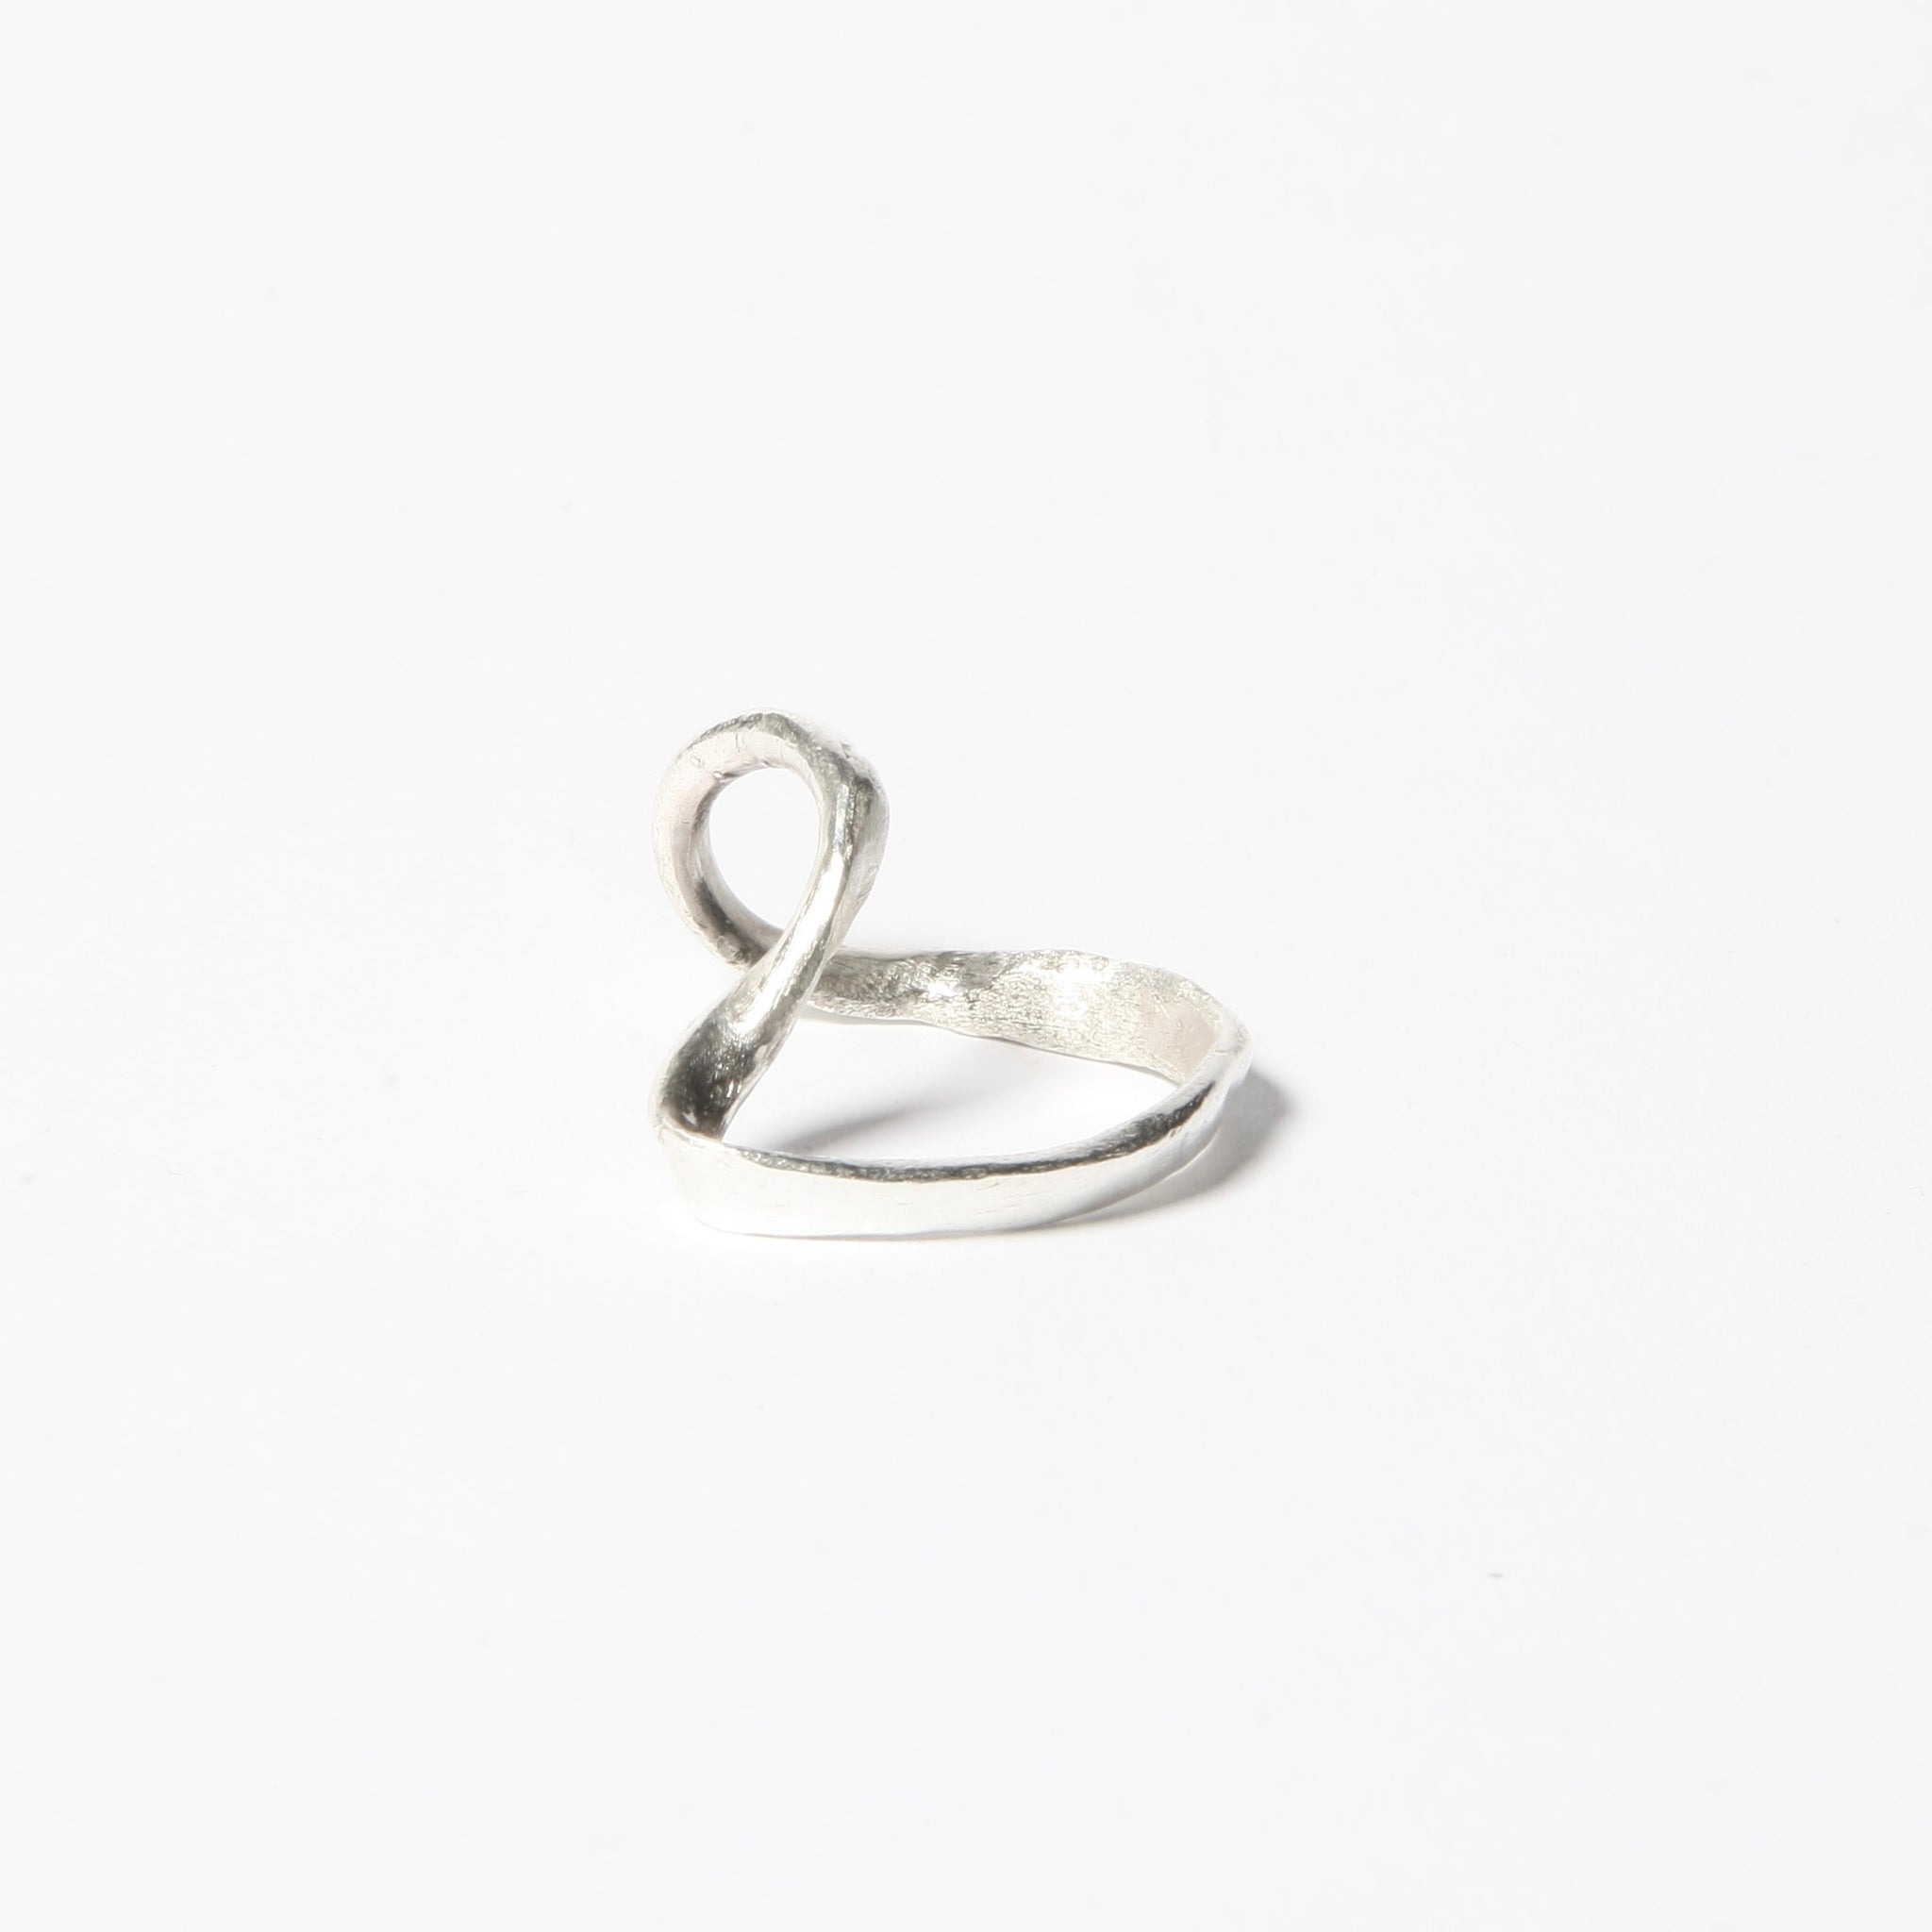 Nuance silver ring by Studio Aseo